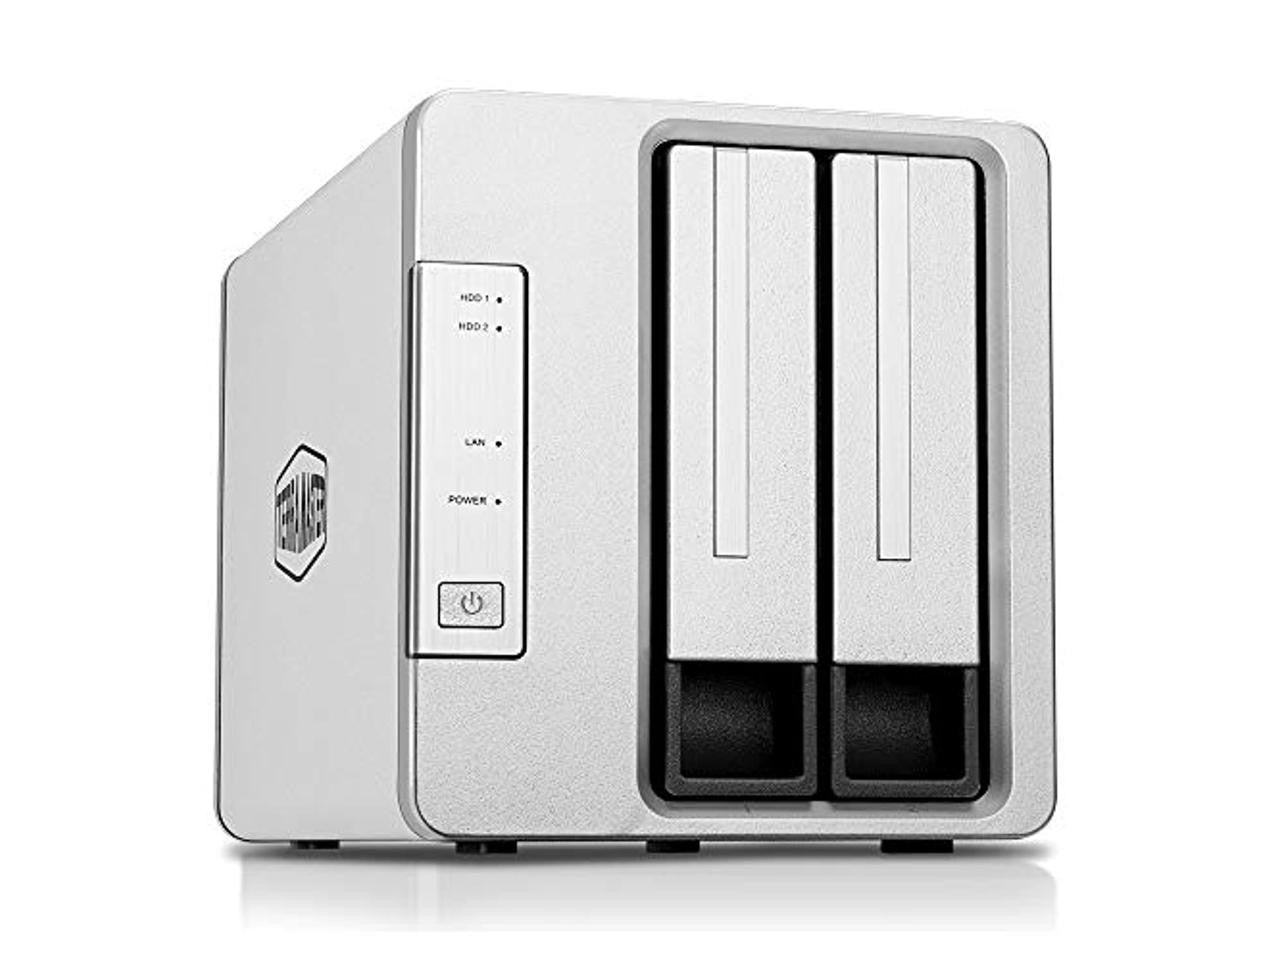 TerraMaster F2-210 2-Bay Home NAS with 12TB (2 x 6TB) of Western Digital Red Plus Drives Fully Assembled and Tested